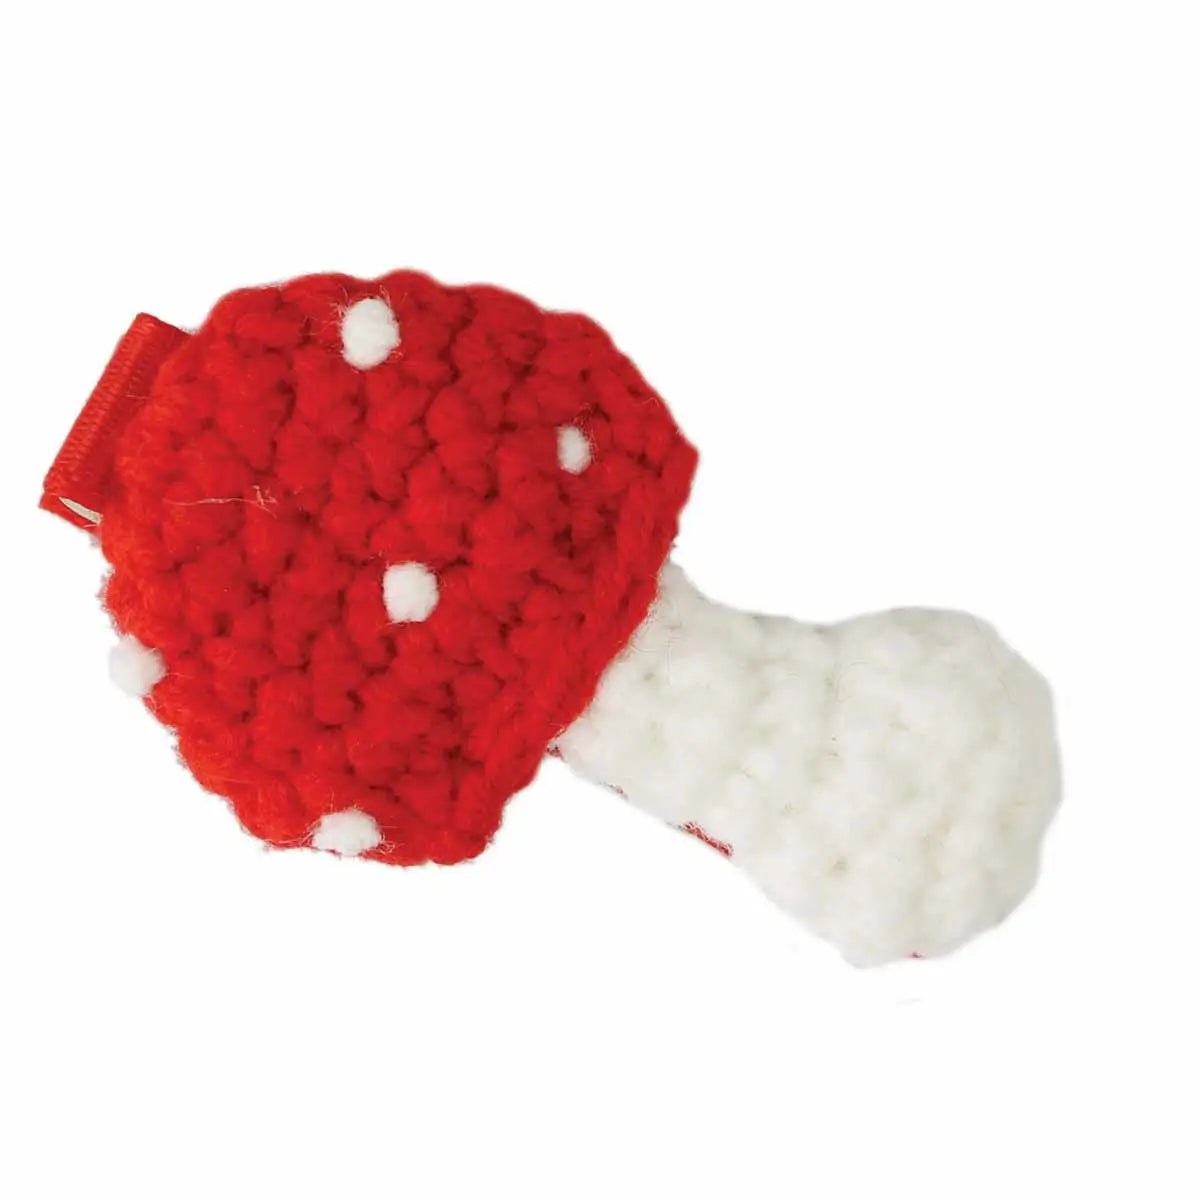 Crocheted white and red spotted mushroom hair clip